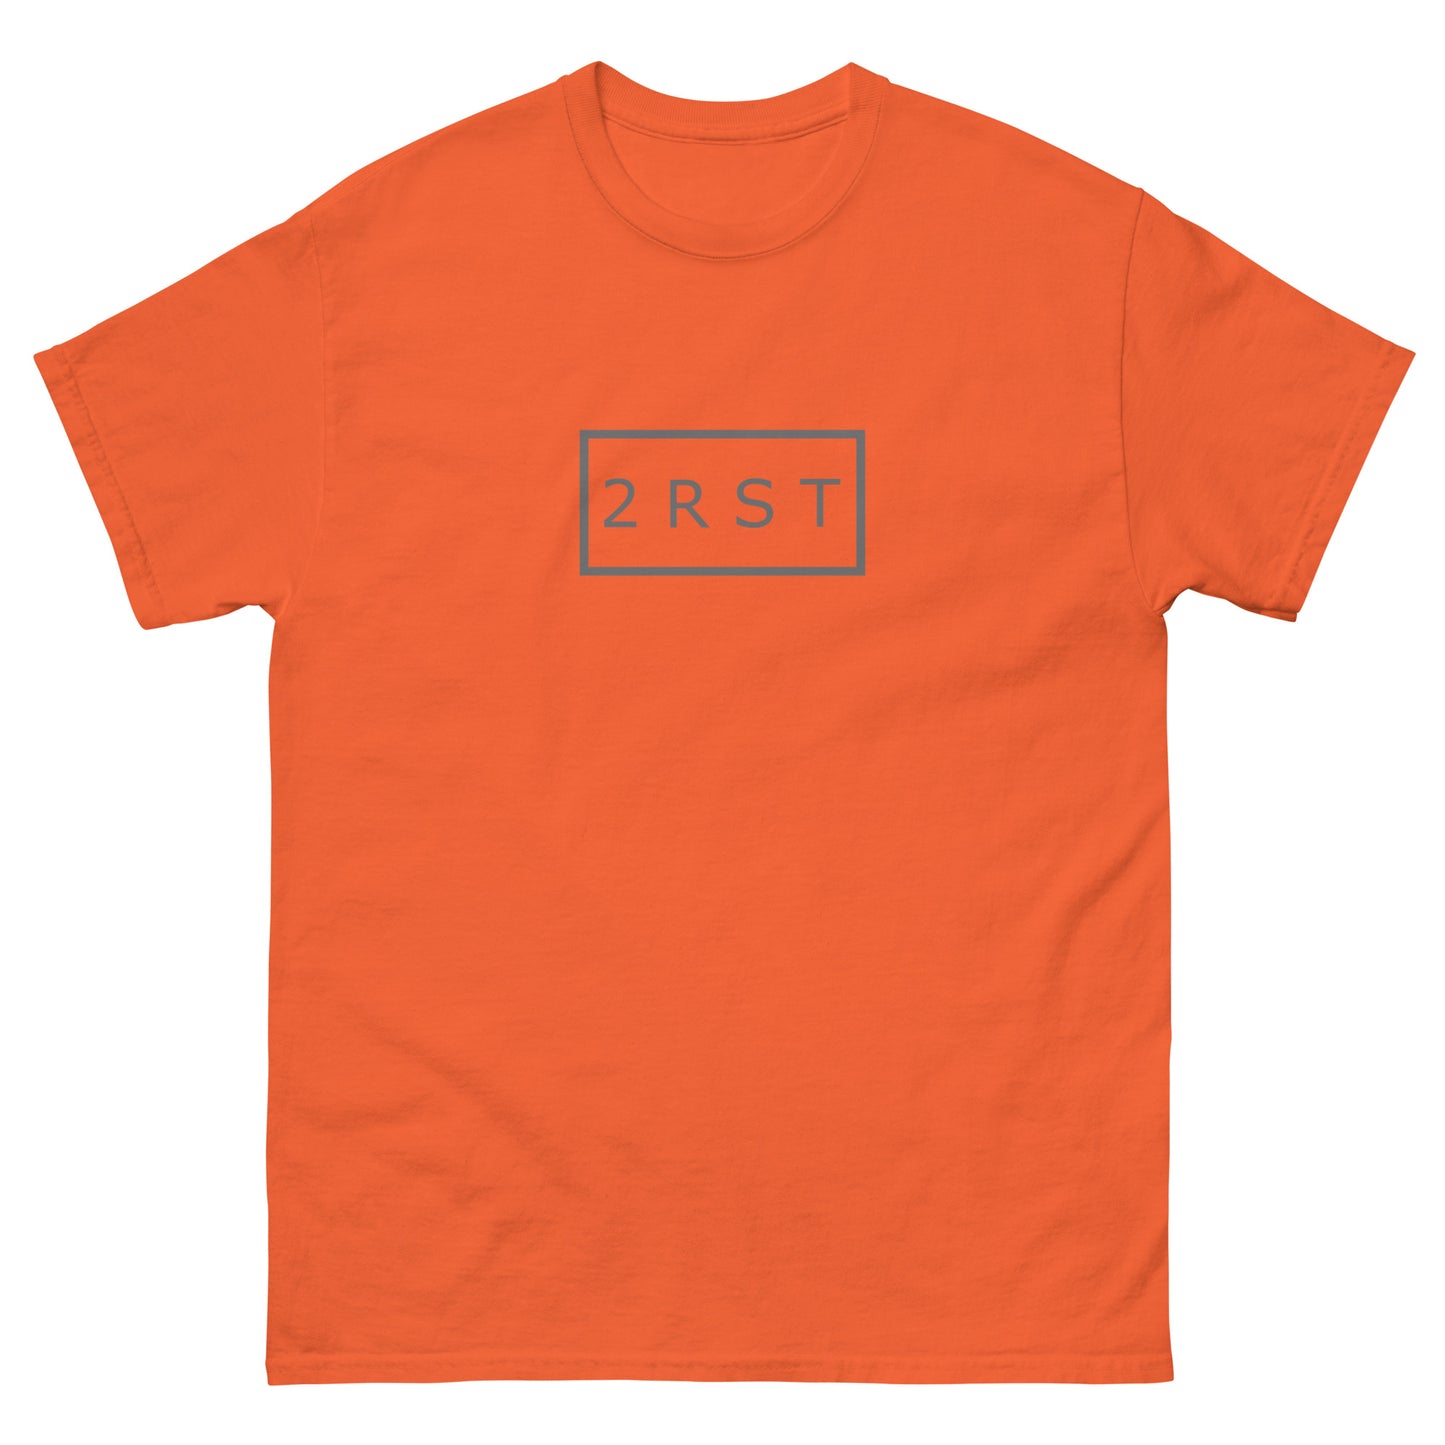 2RST Rectangle Tee